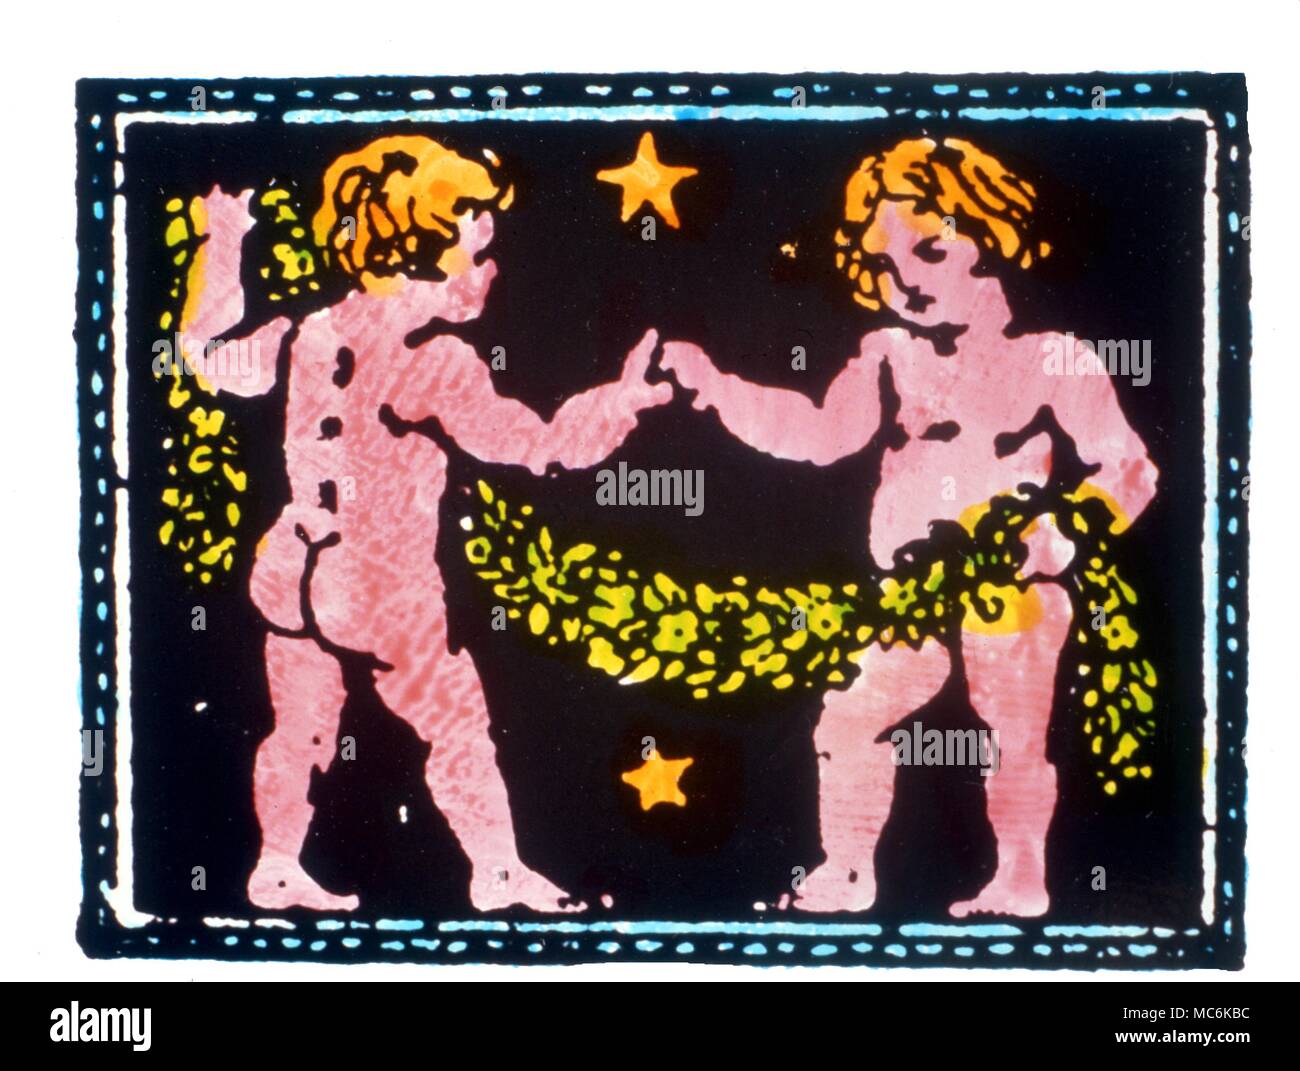 Astrology Zodiacal Signs Gemini From a Dutch book on astrology published in 1917 Stock Photo